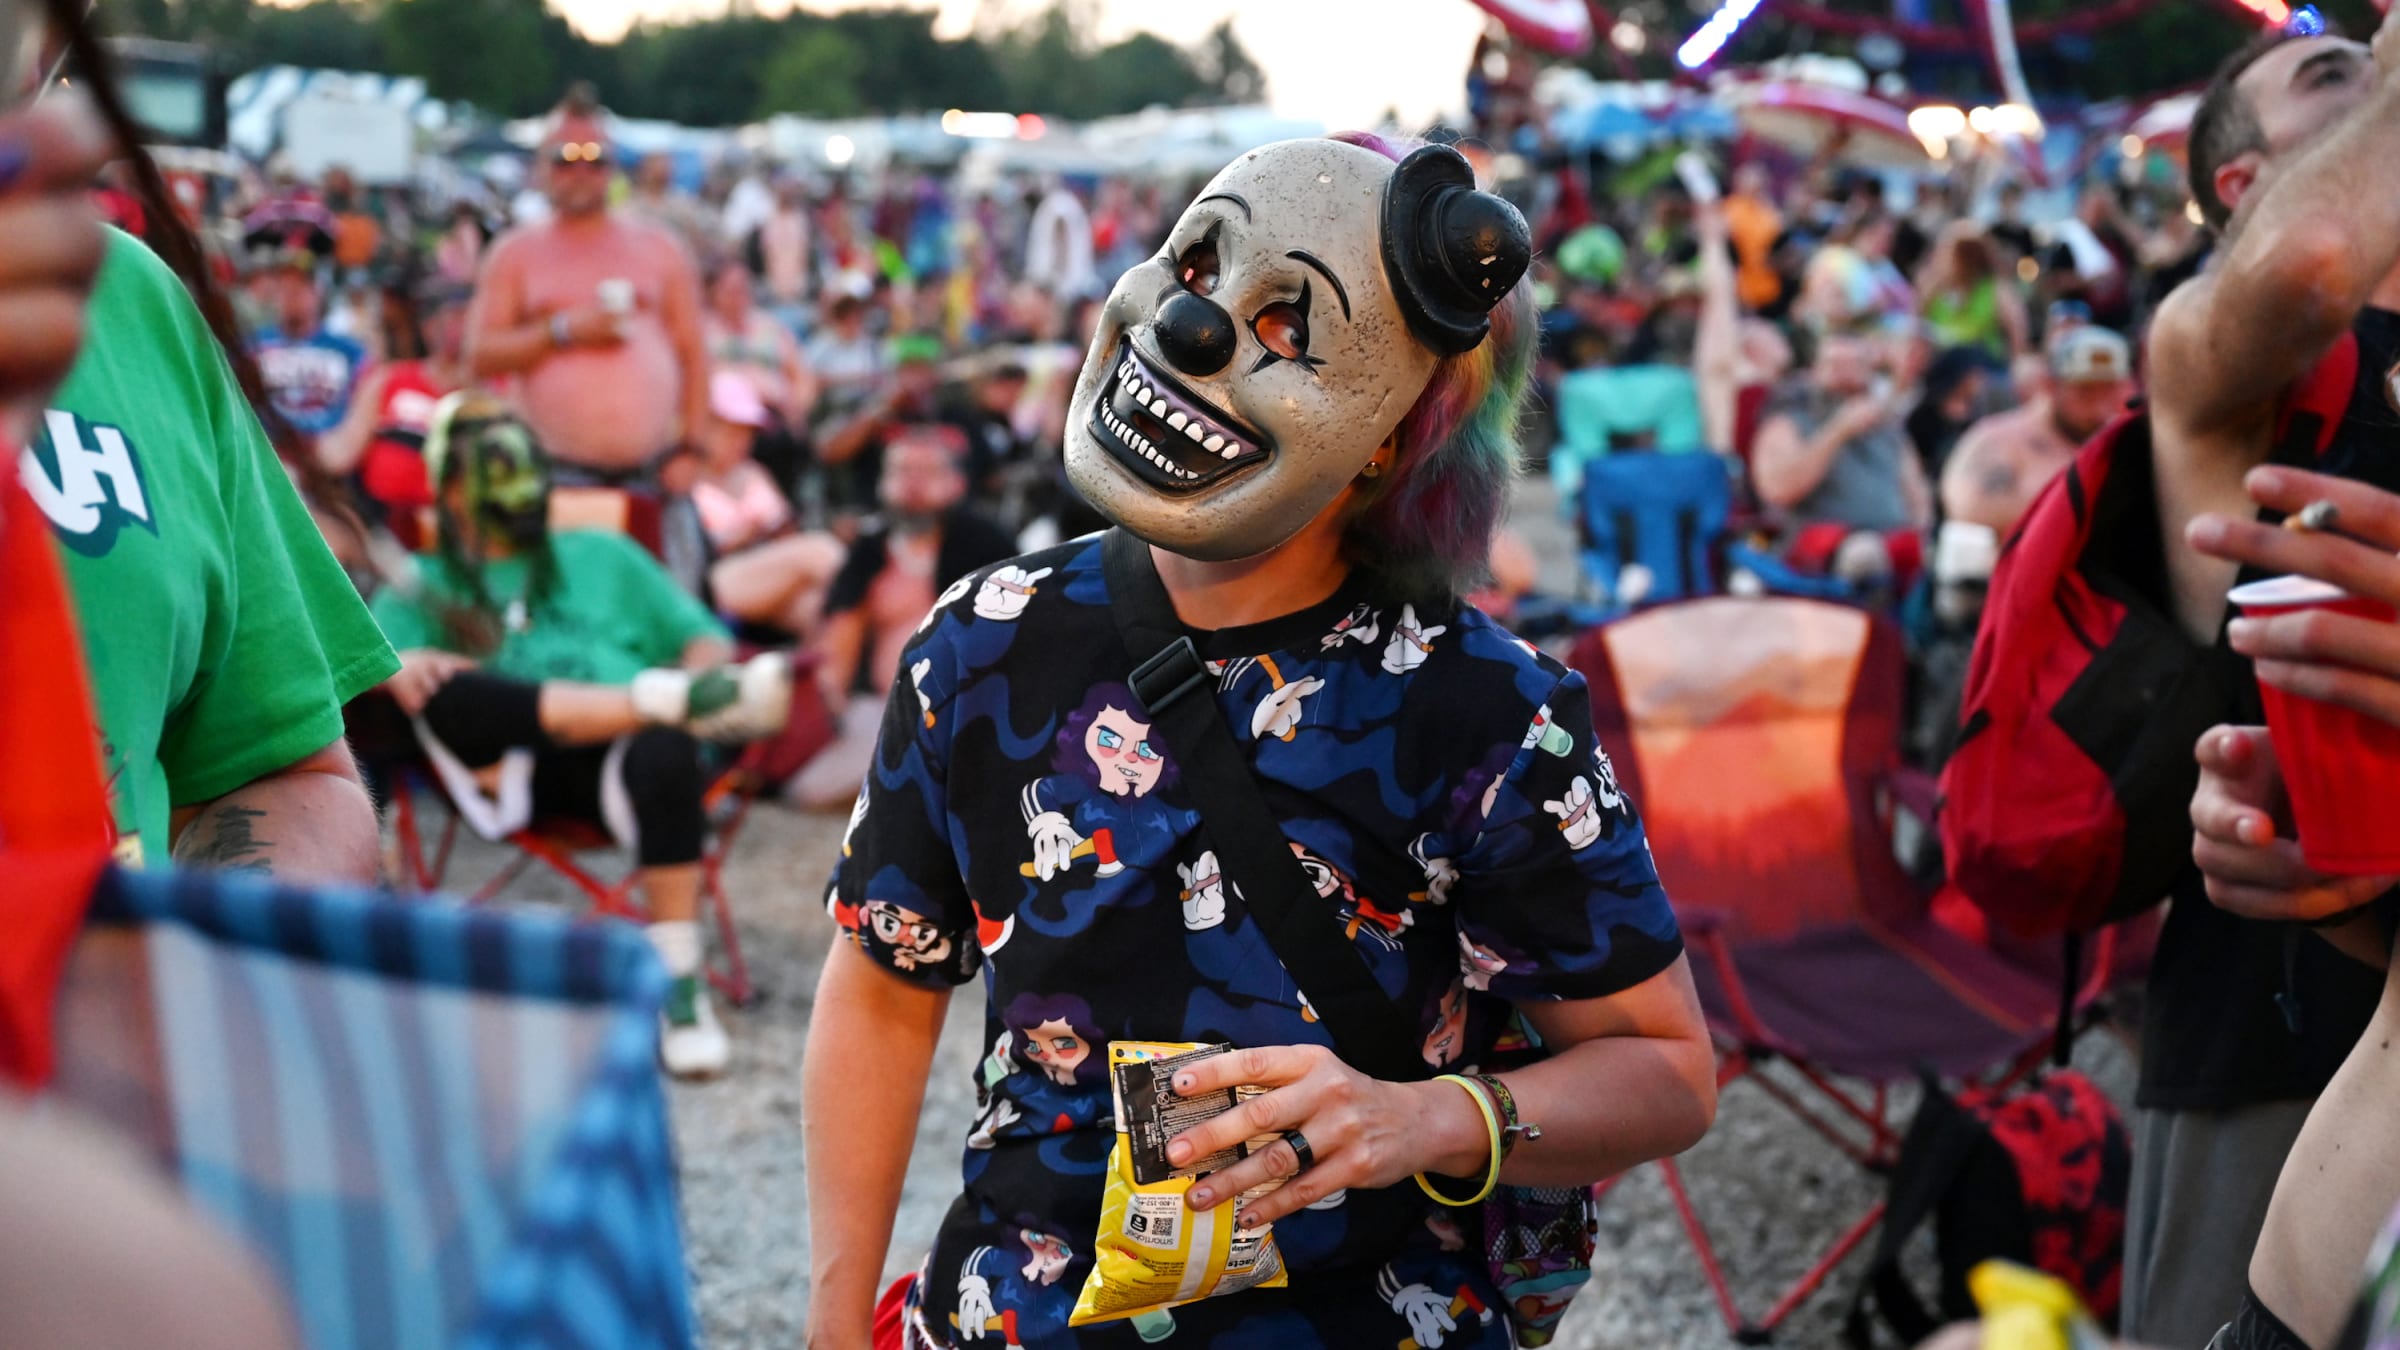 A fan in a clown mask poses at the 2023 Gathering of the Juggalos